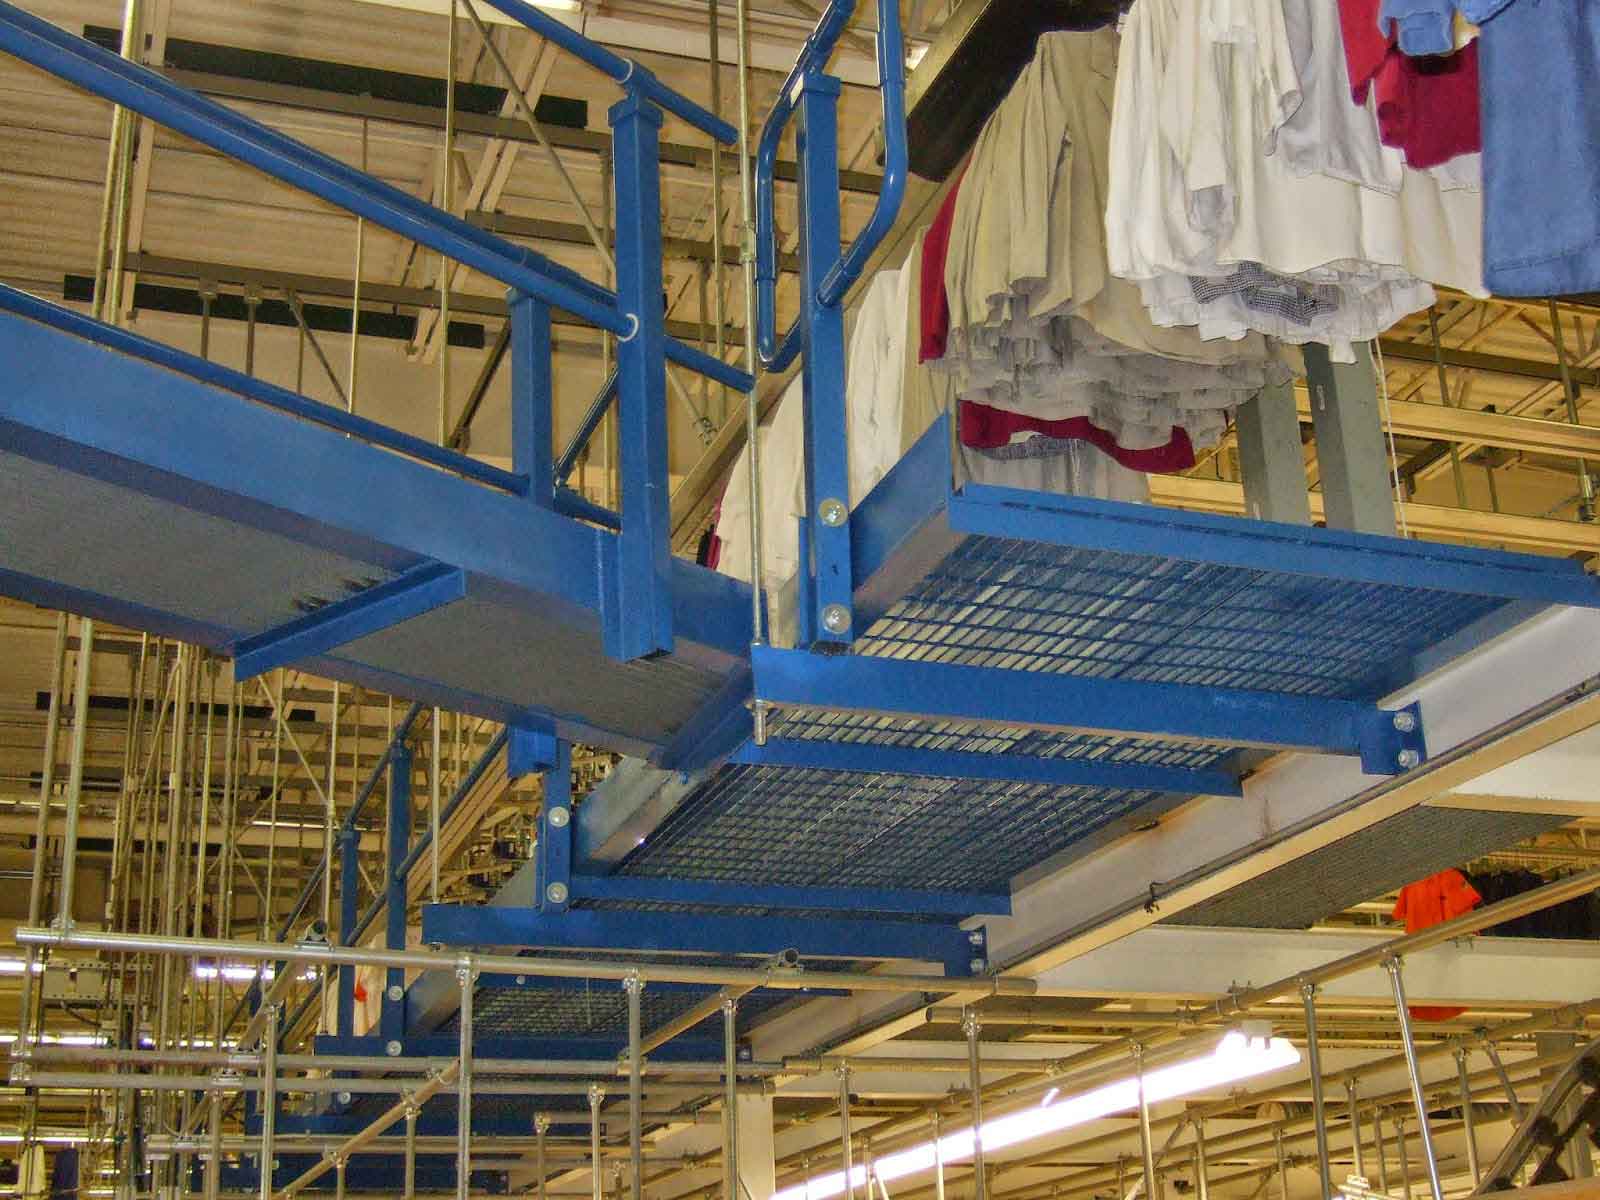 A work platform sits above the ground level of a work area with an automated clothing rack that goes above it